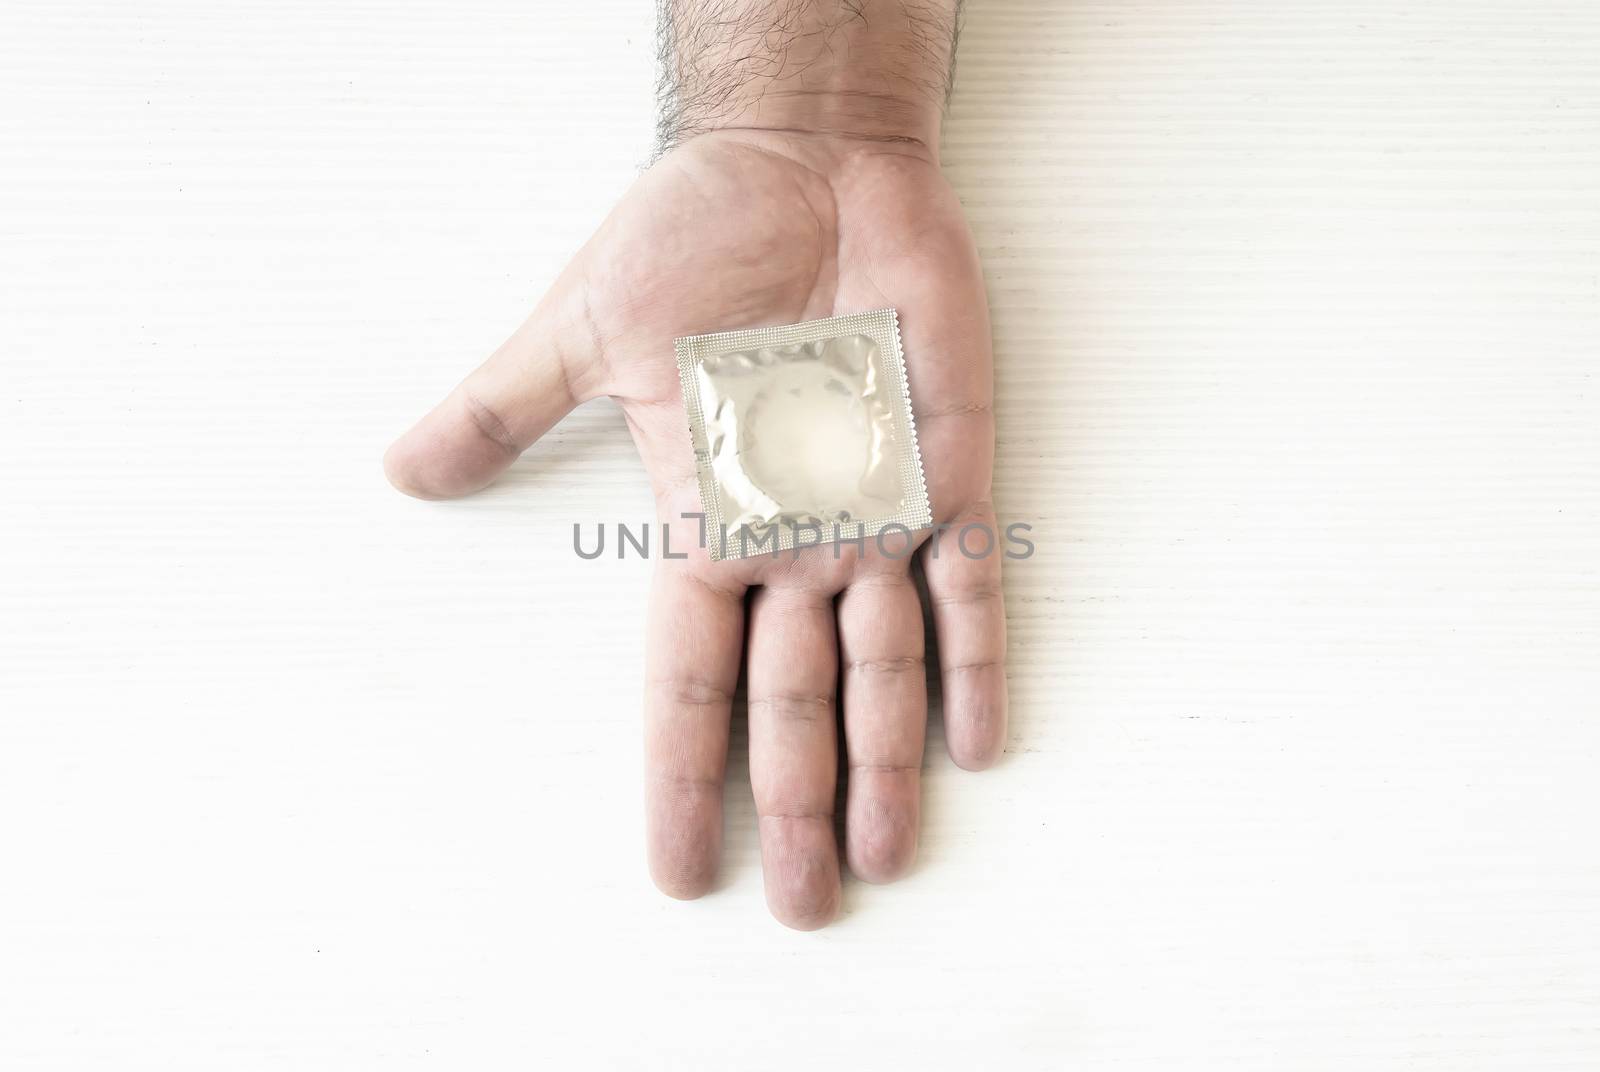 a condom packed on the palm of a male hand. Health and contraception. Prevention of sexually transmitted diseases. Safe sex